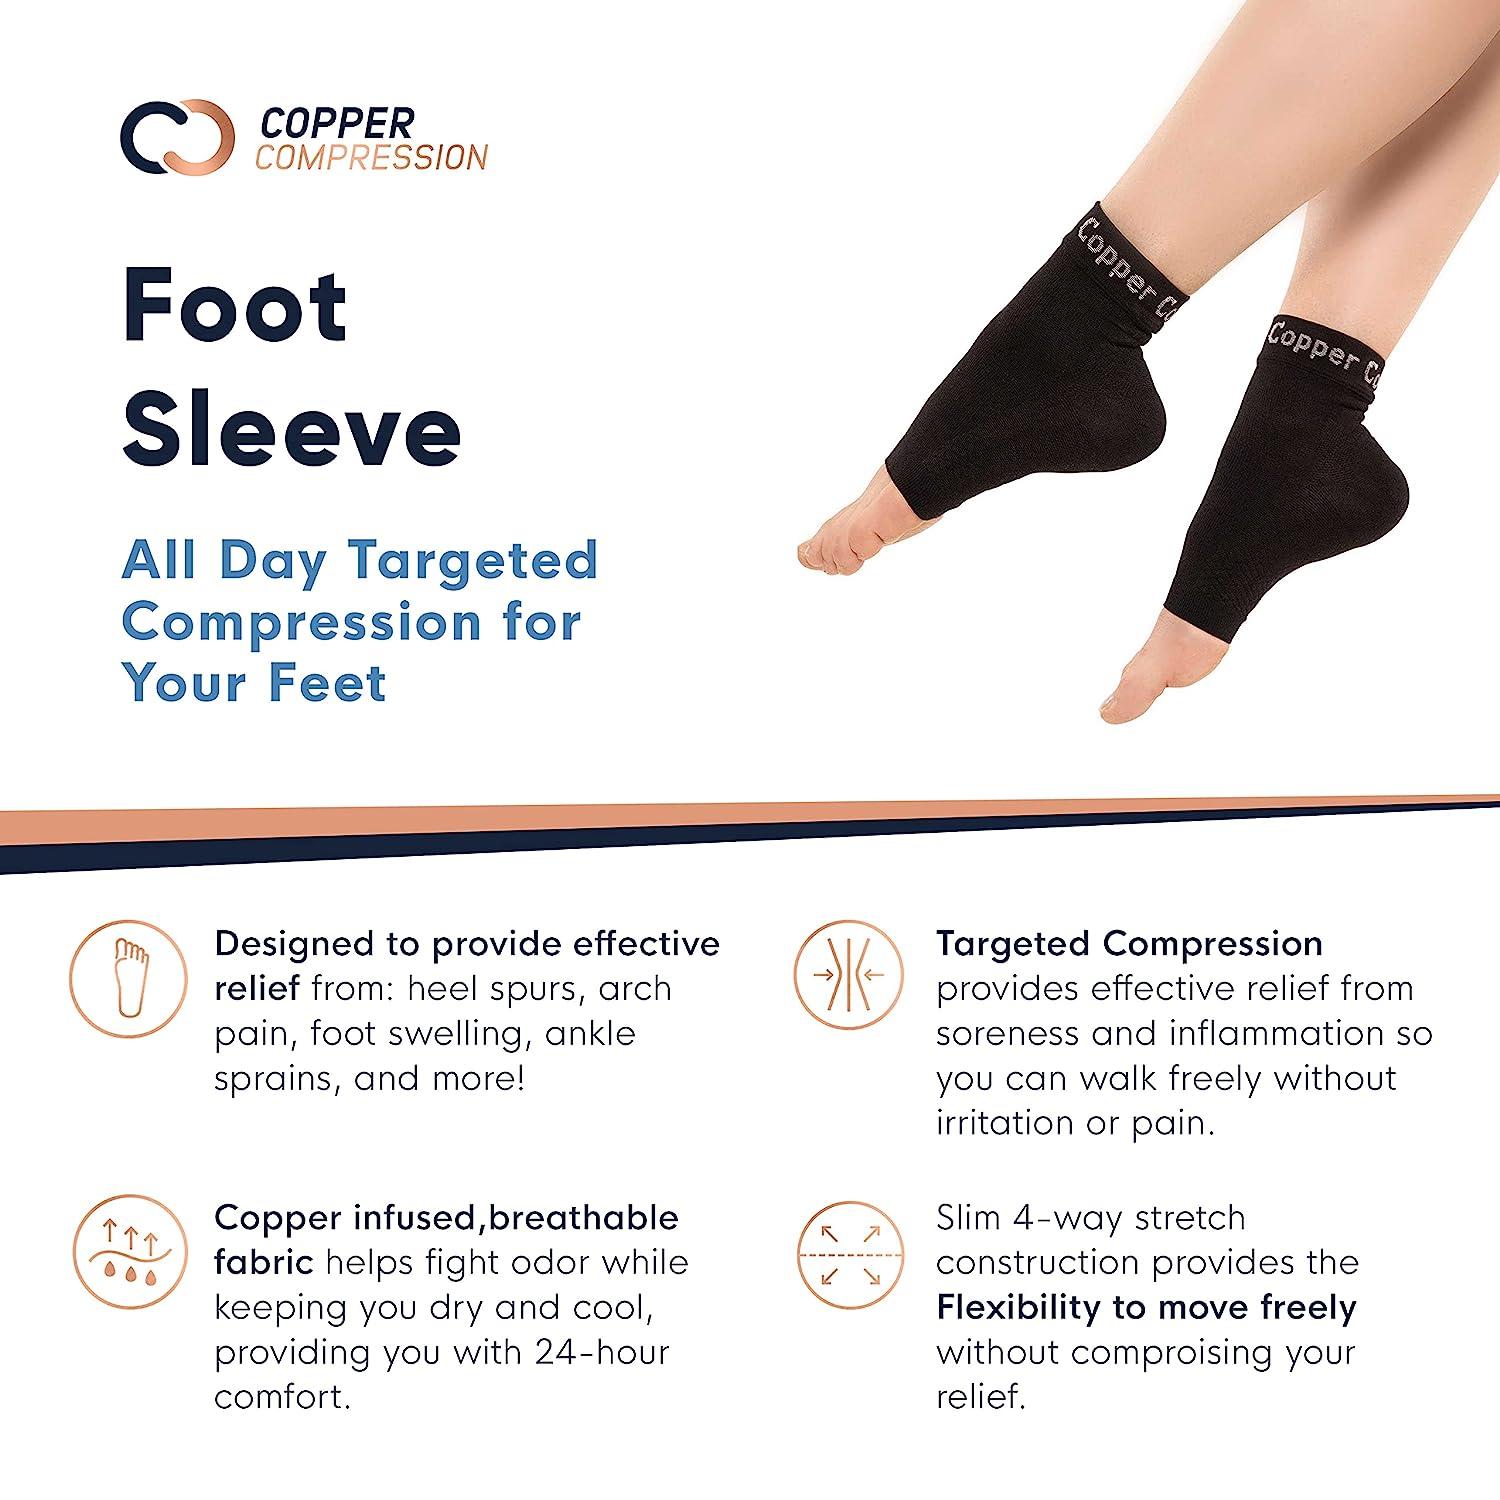 Copper Compression Recovery Foot Sleeves / Plantar Fasciitis Support Socks  - GUARANTEED To Speed Up Recovery & Provide Relief Of Heel Spurs, Arch  Pain, Foot Swelling & Ankle Injuries 1 PAIR, Medium